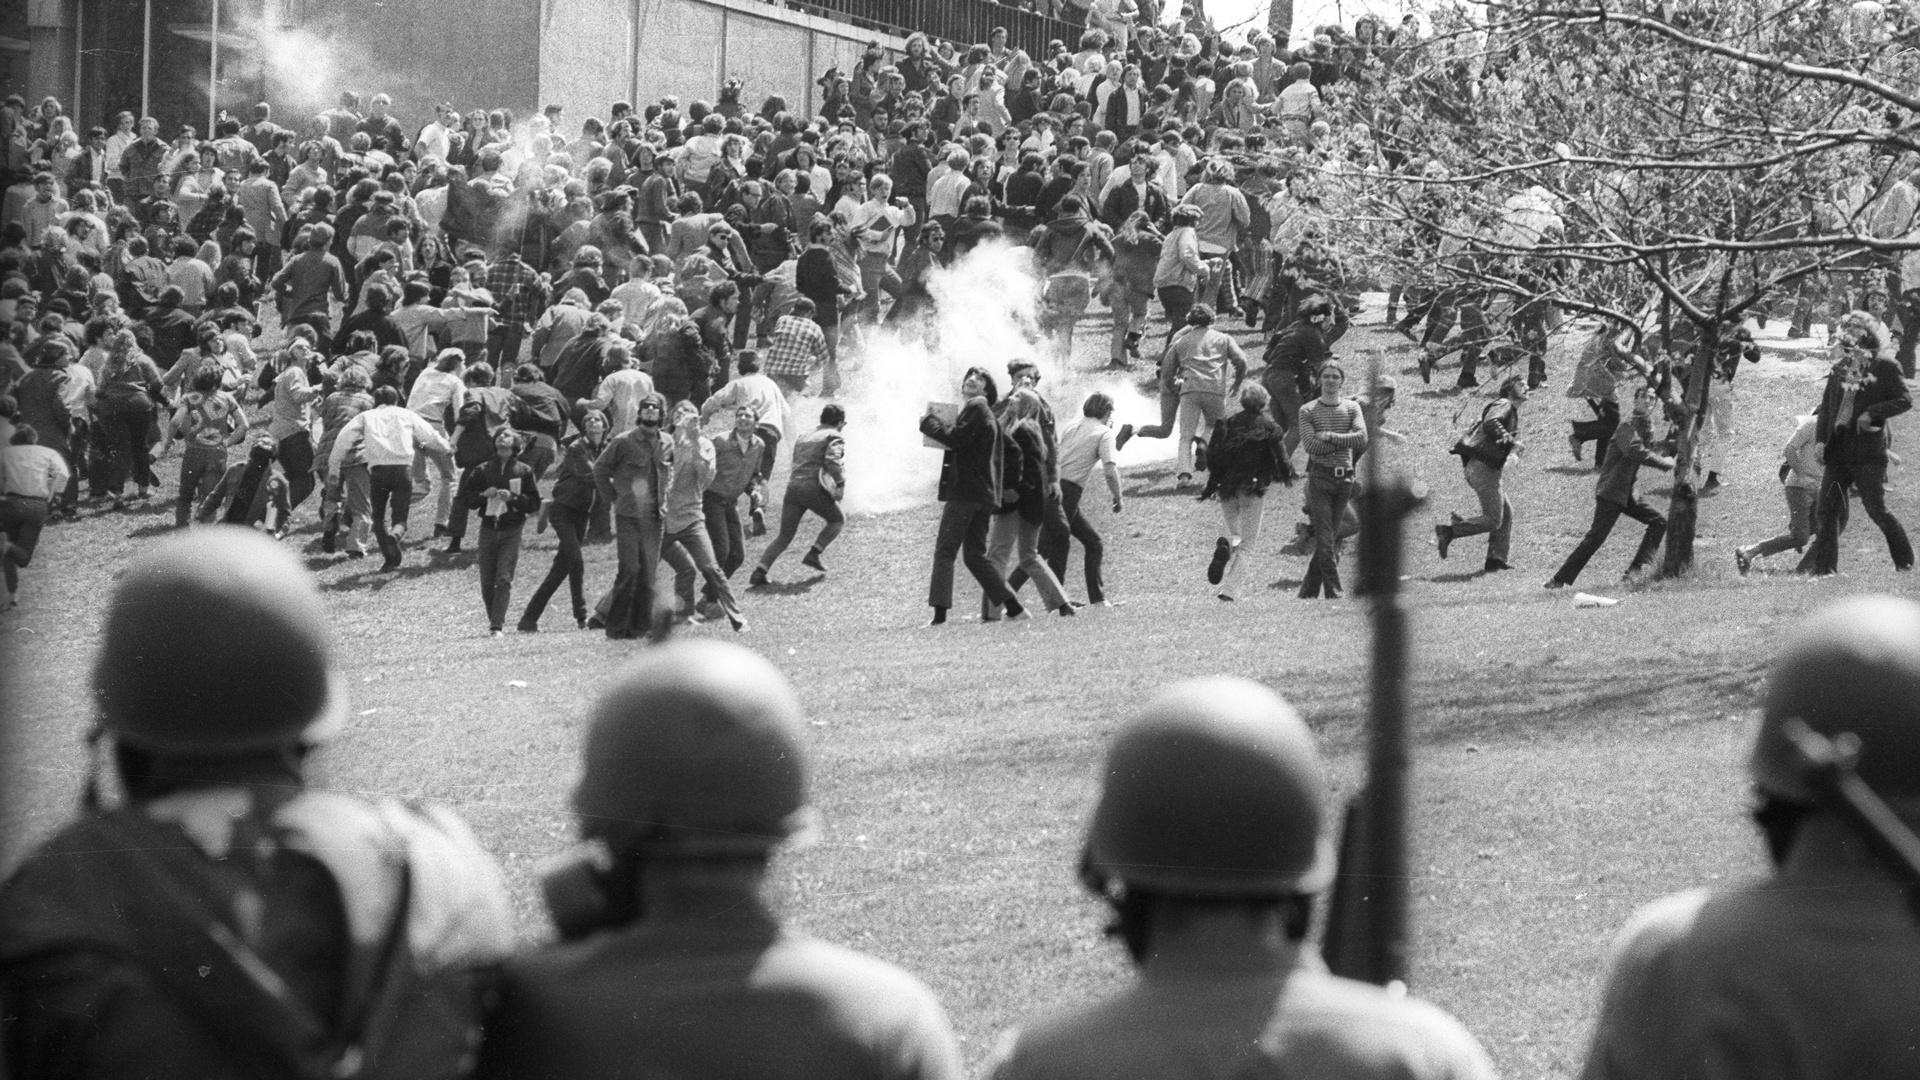 May 4, 1970, students retreat up Blanket Hill as guards advance with tear gas at Kent State.